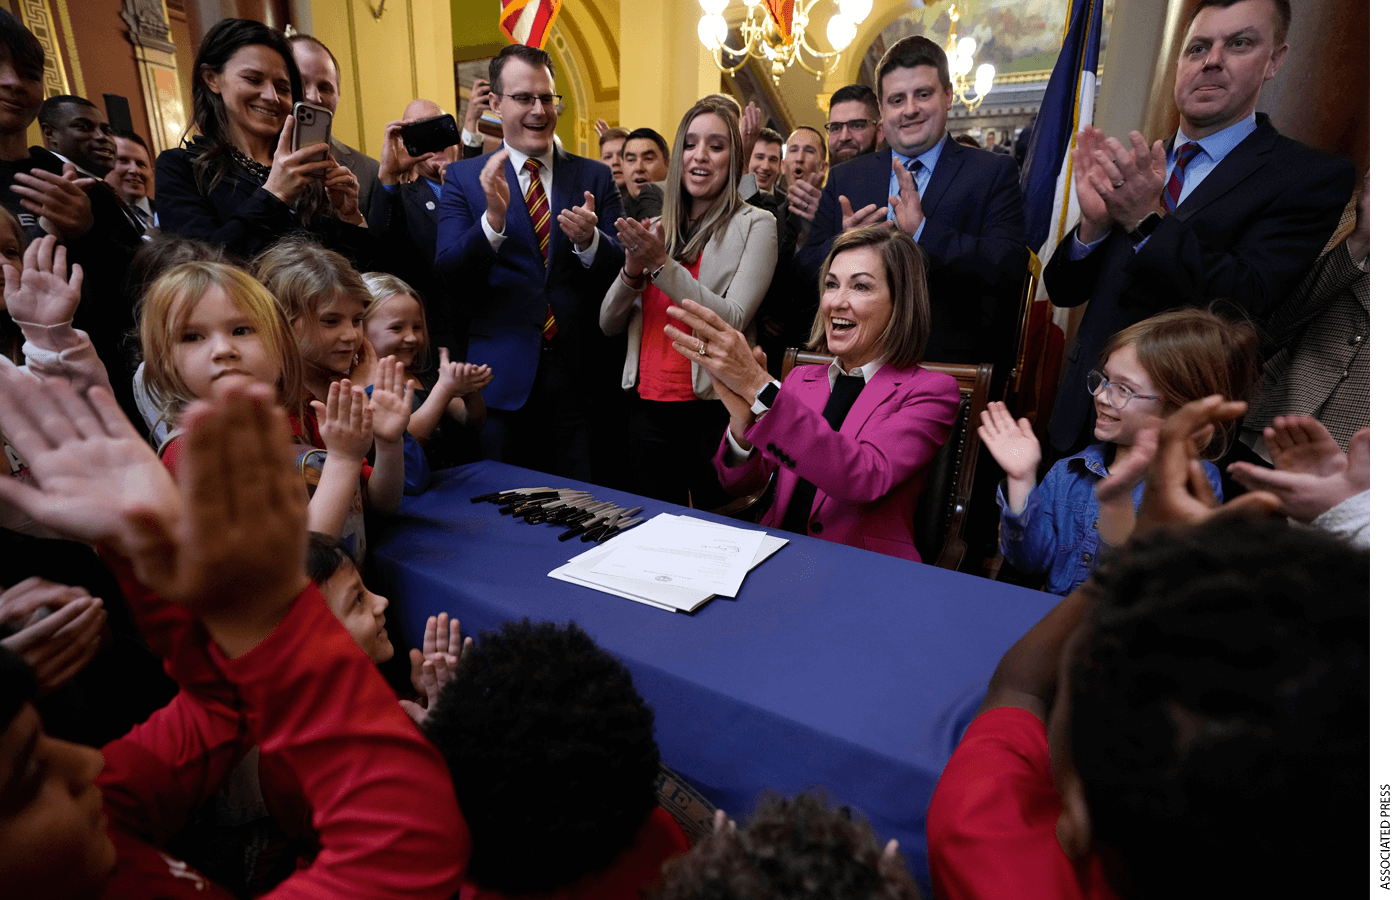 Iowa Governor Kim Reynolds reacts after signing a bill that creates education savings accounts, Tuesday, Jan. 24, 2023, at the Statehouse in Des Moines, Iowa.